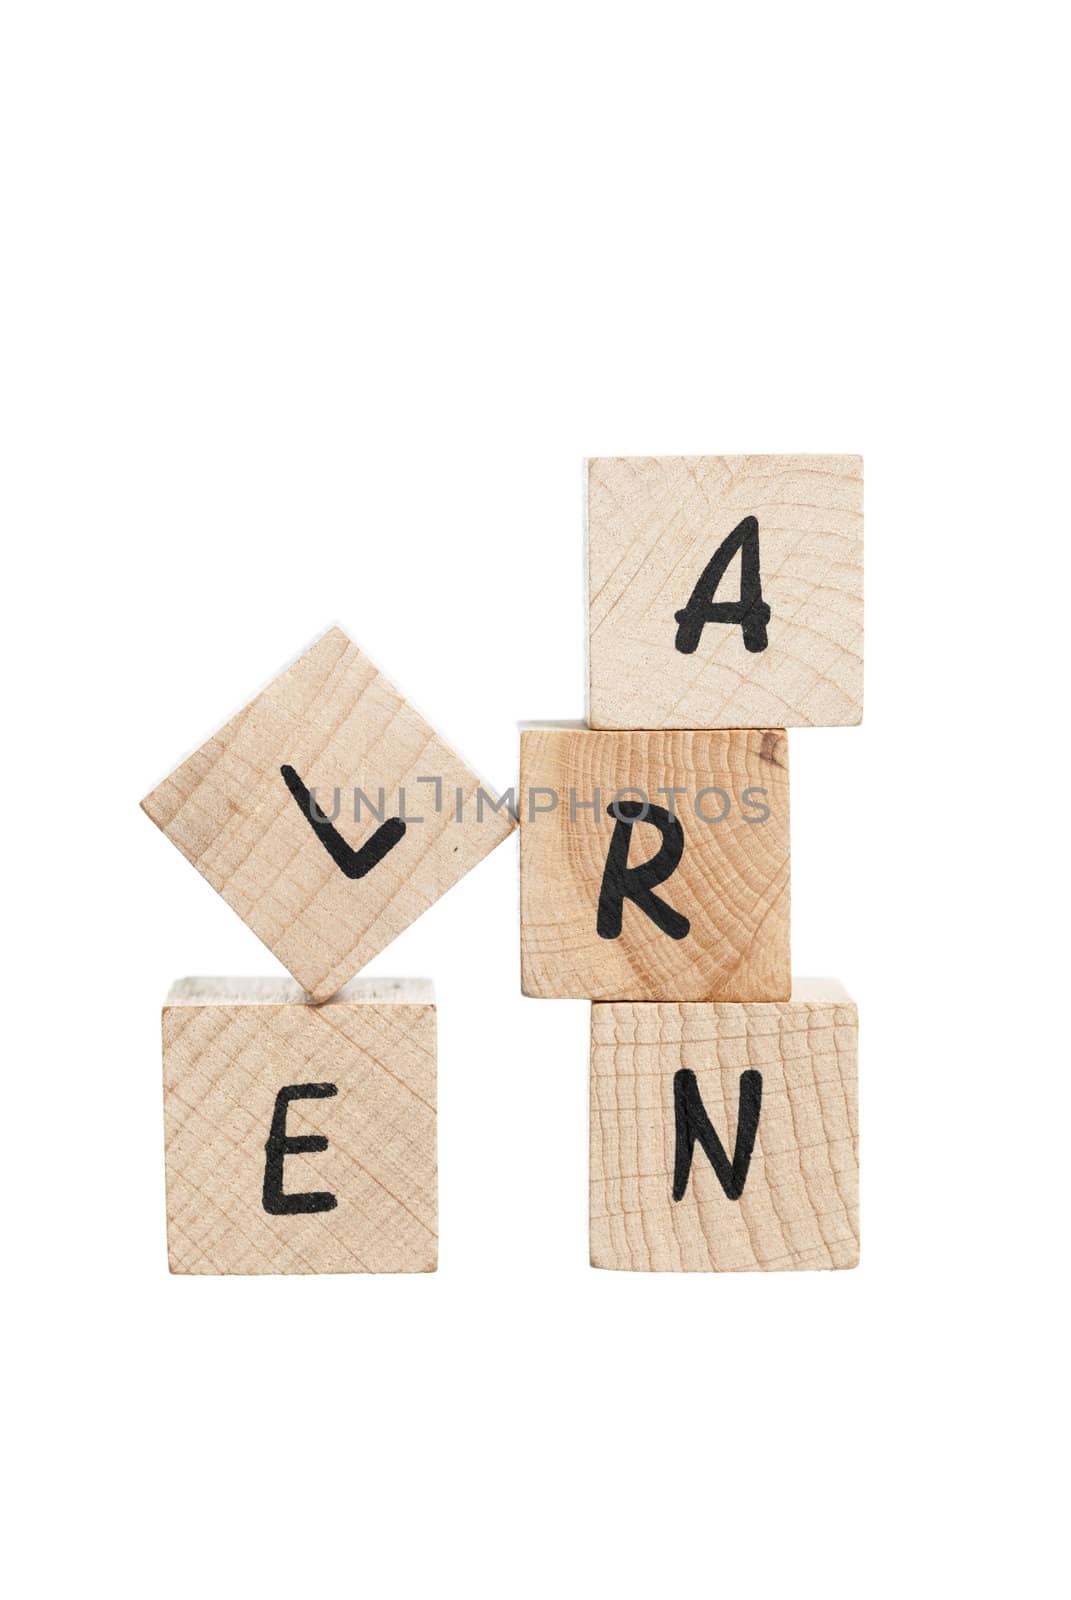 Learn spelled out with wooden blocks. White background.